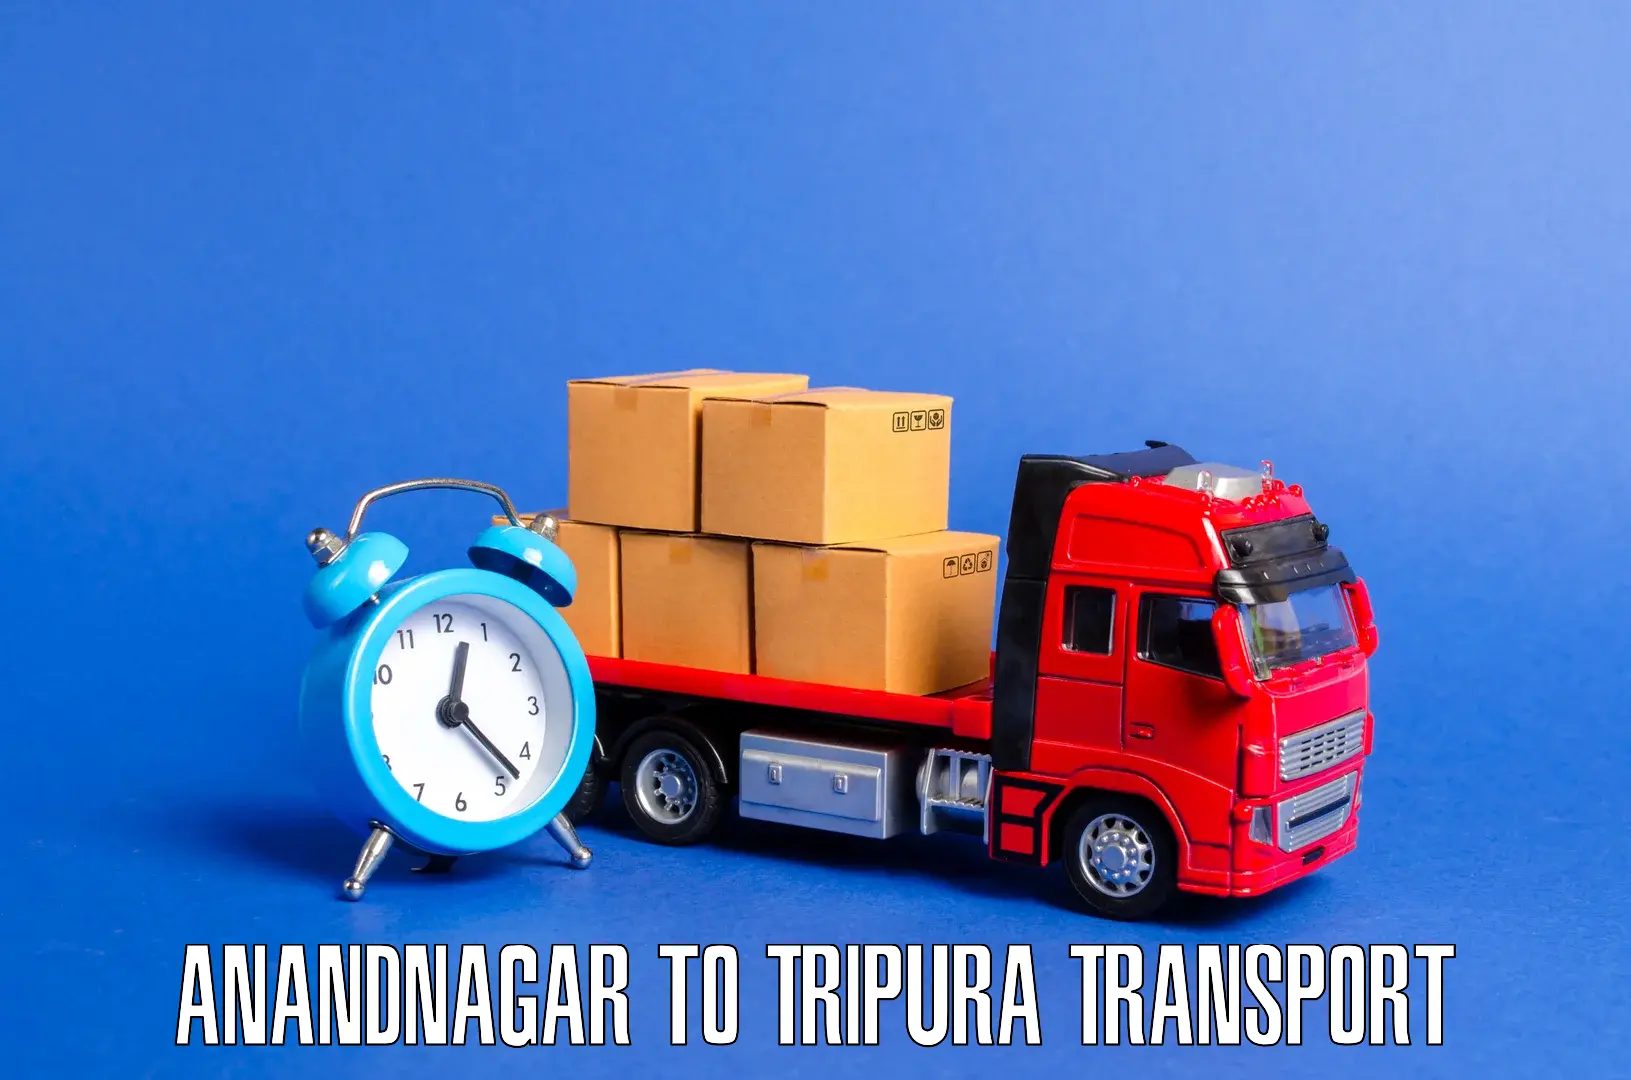 Delivery service Anandnagar to Tripura